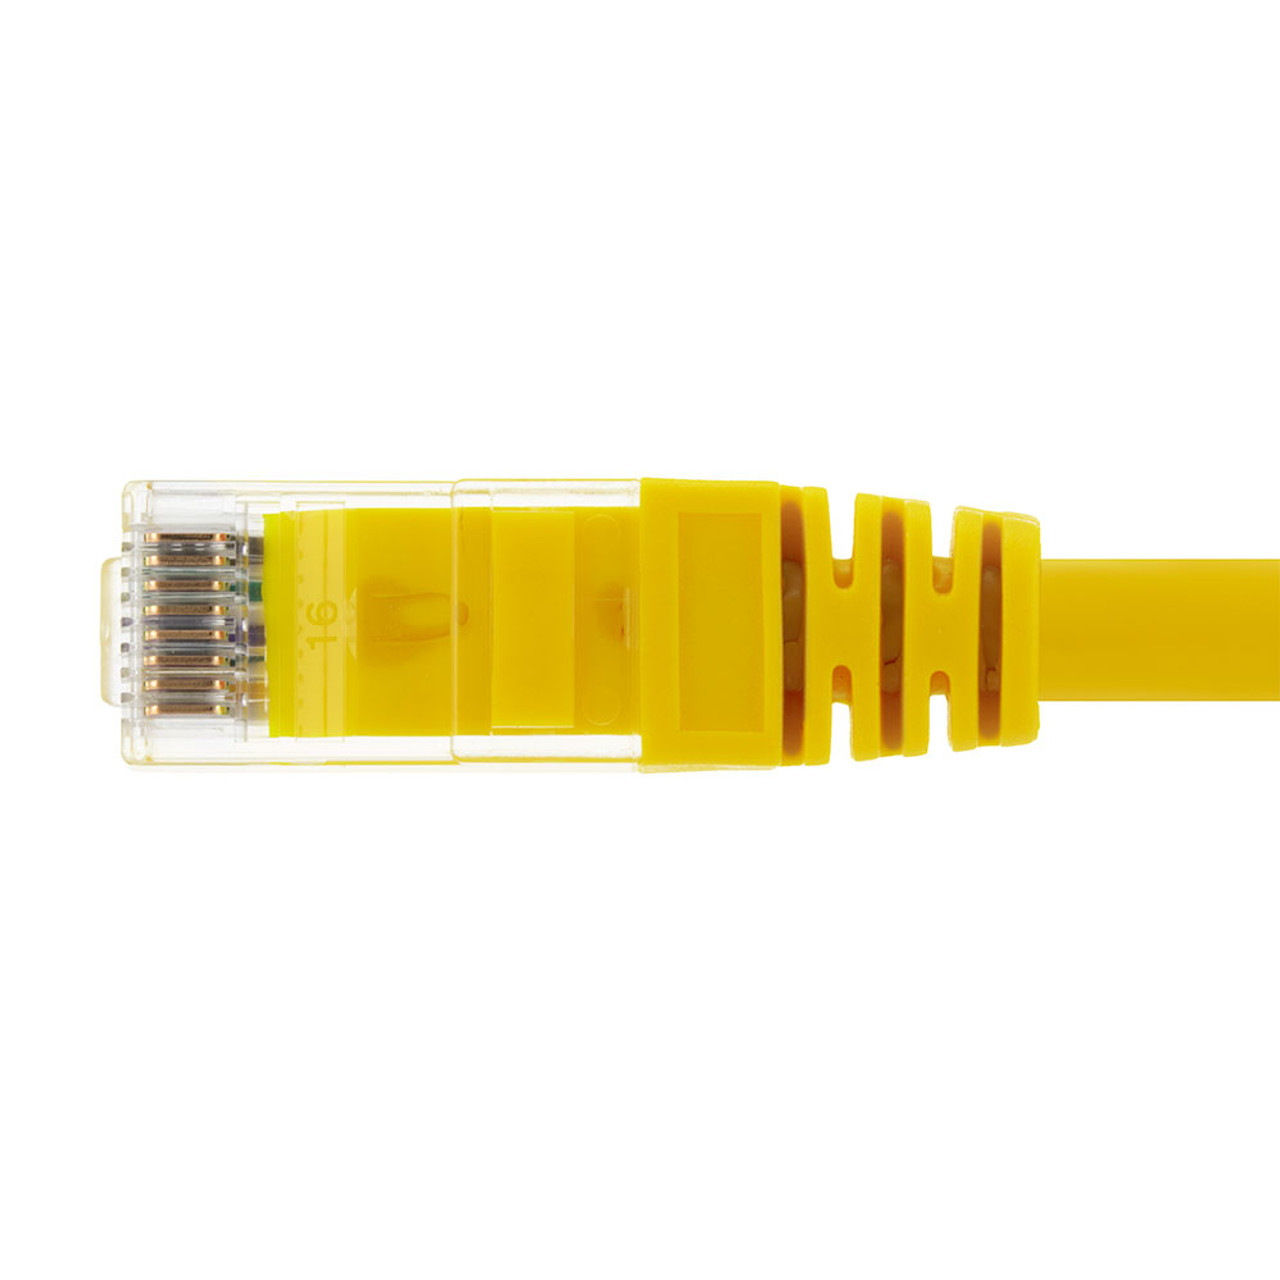 Ethernet Patch Cable CAT6, UTP, 24AWG, 0.5 Ft,  10 pack, Yellow